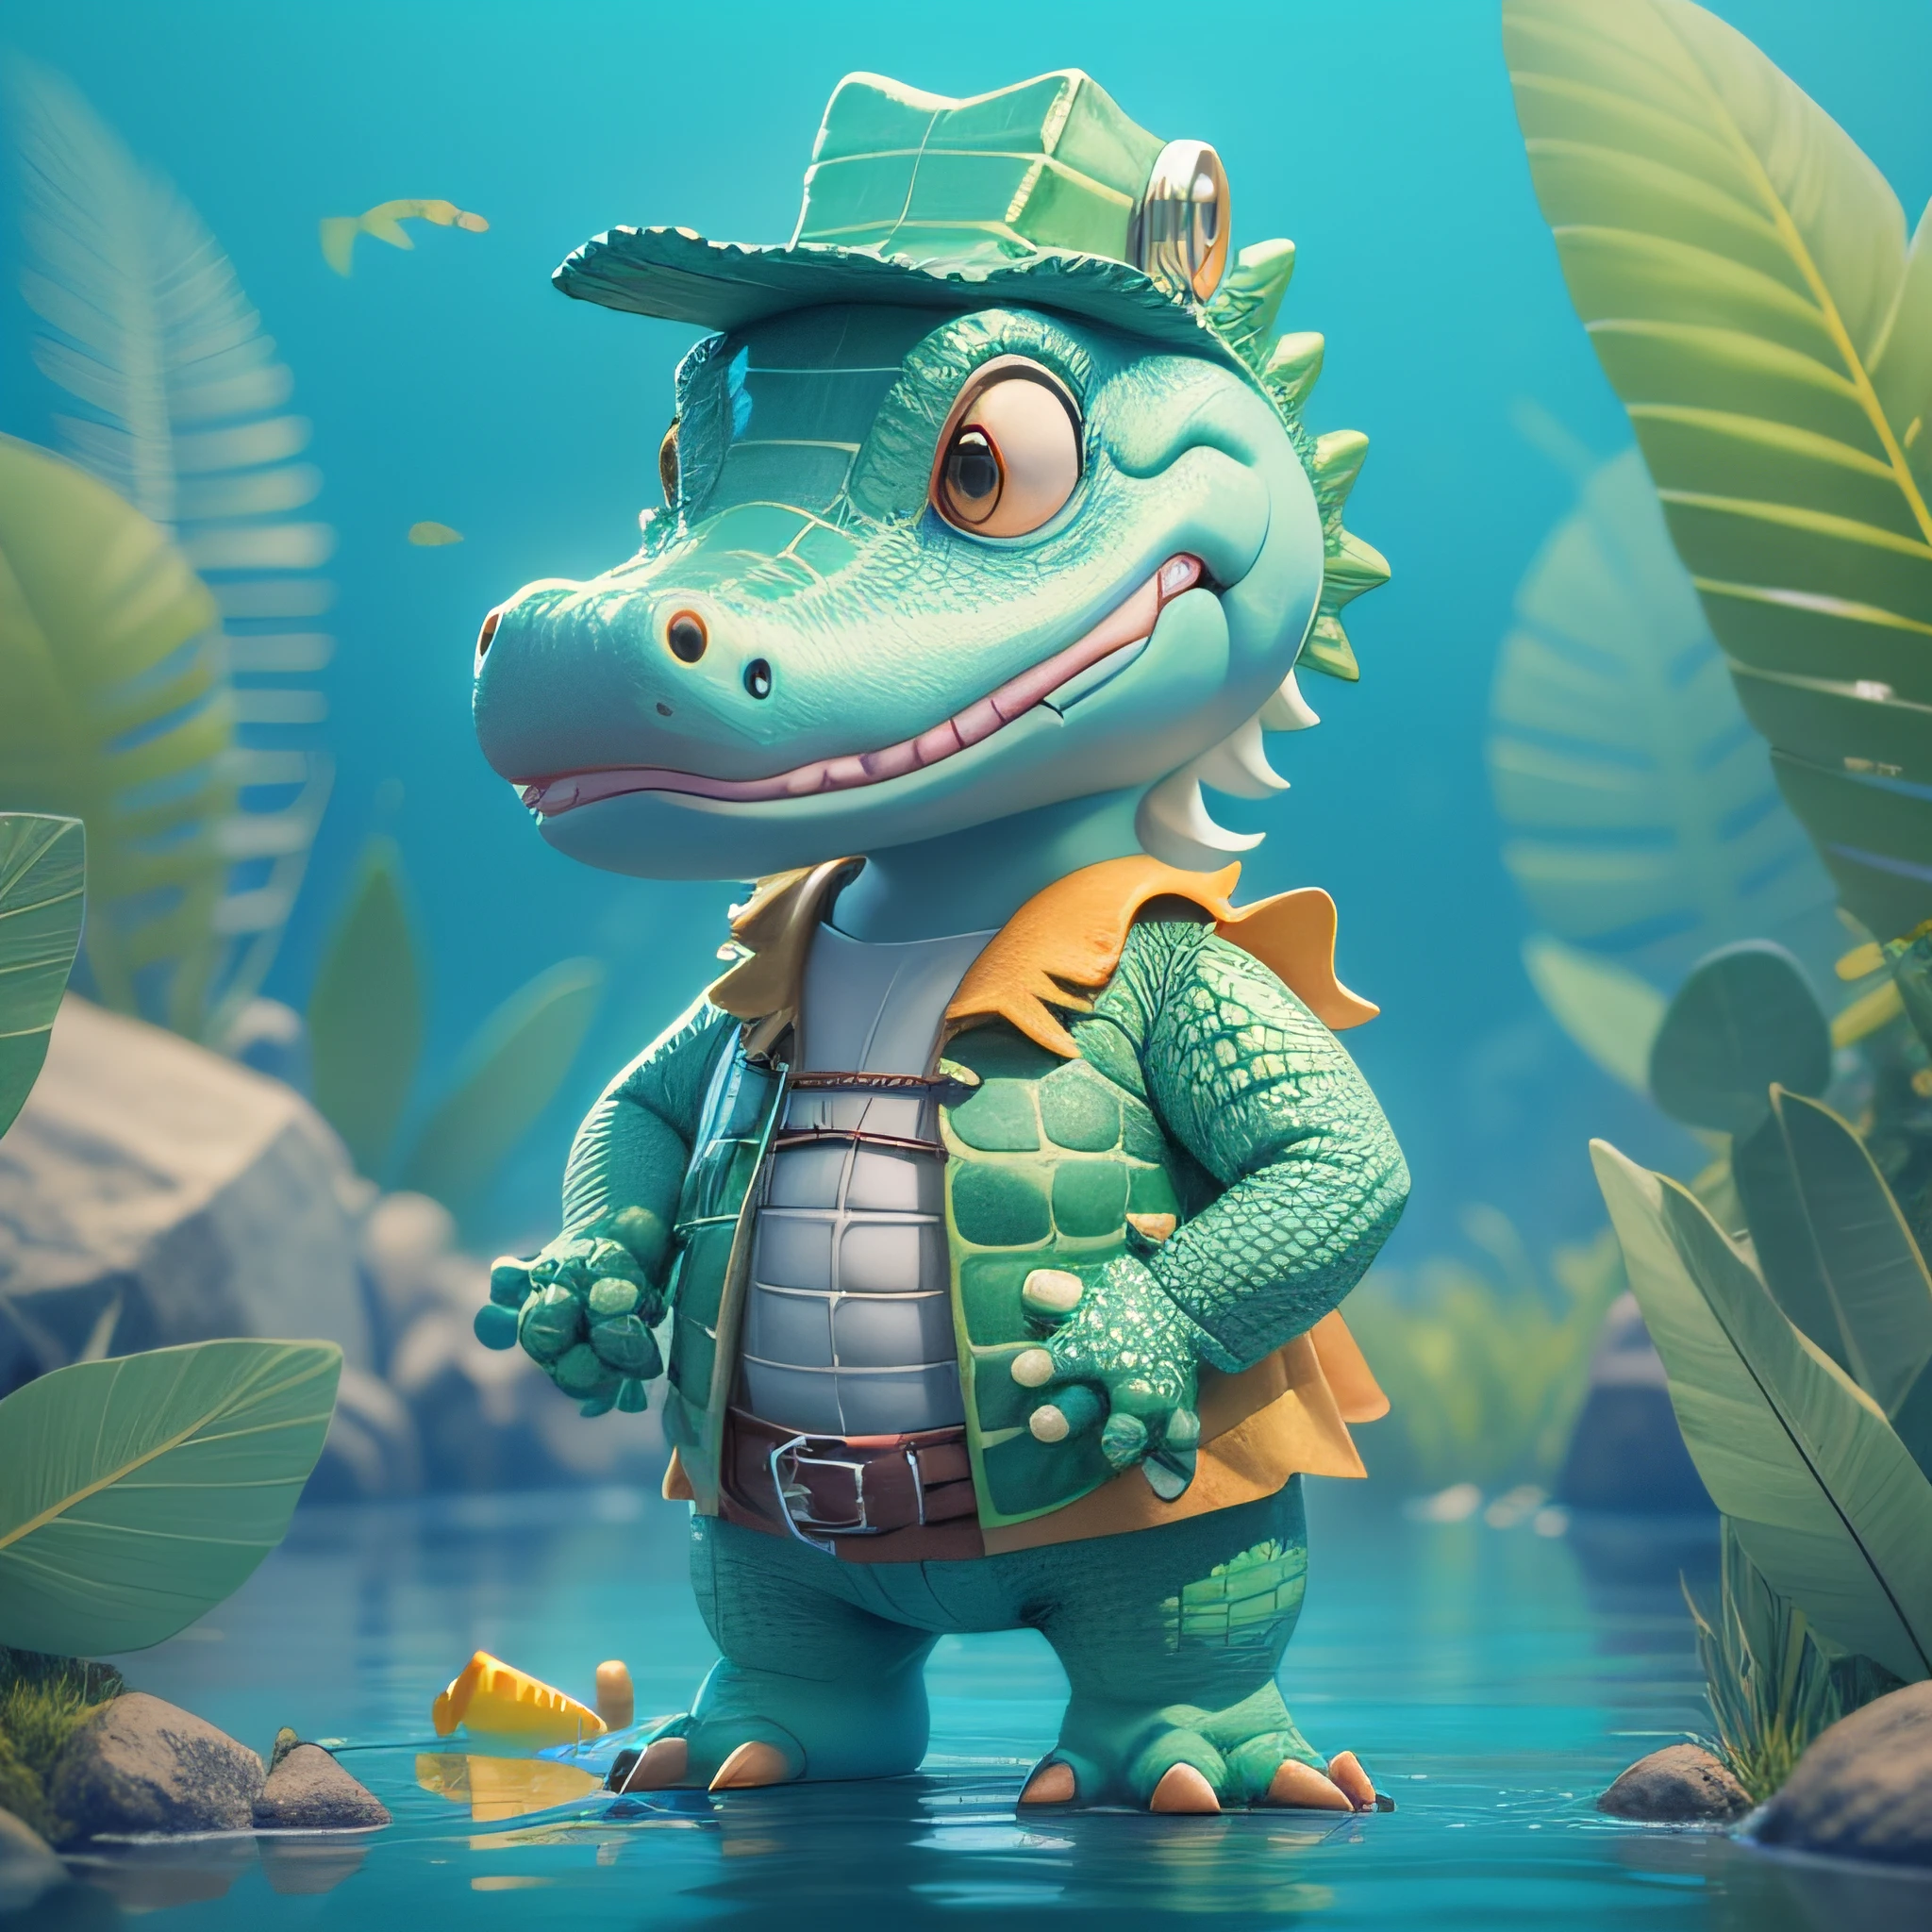 highly detailed 3D render cute alligator with fishman costume, kids cartoon style, high detailed textures, soft smooth textures, aqua rivers color gradient in background.